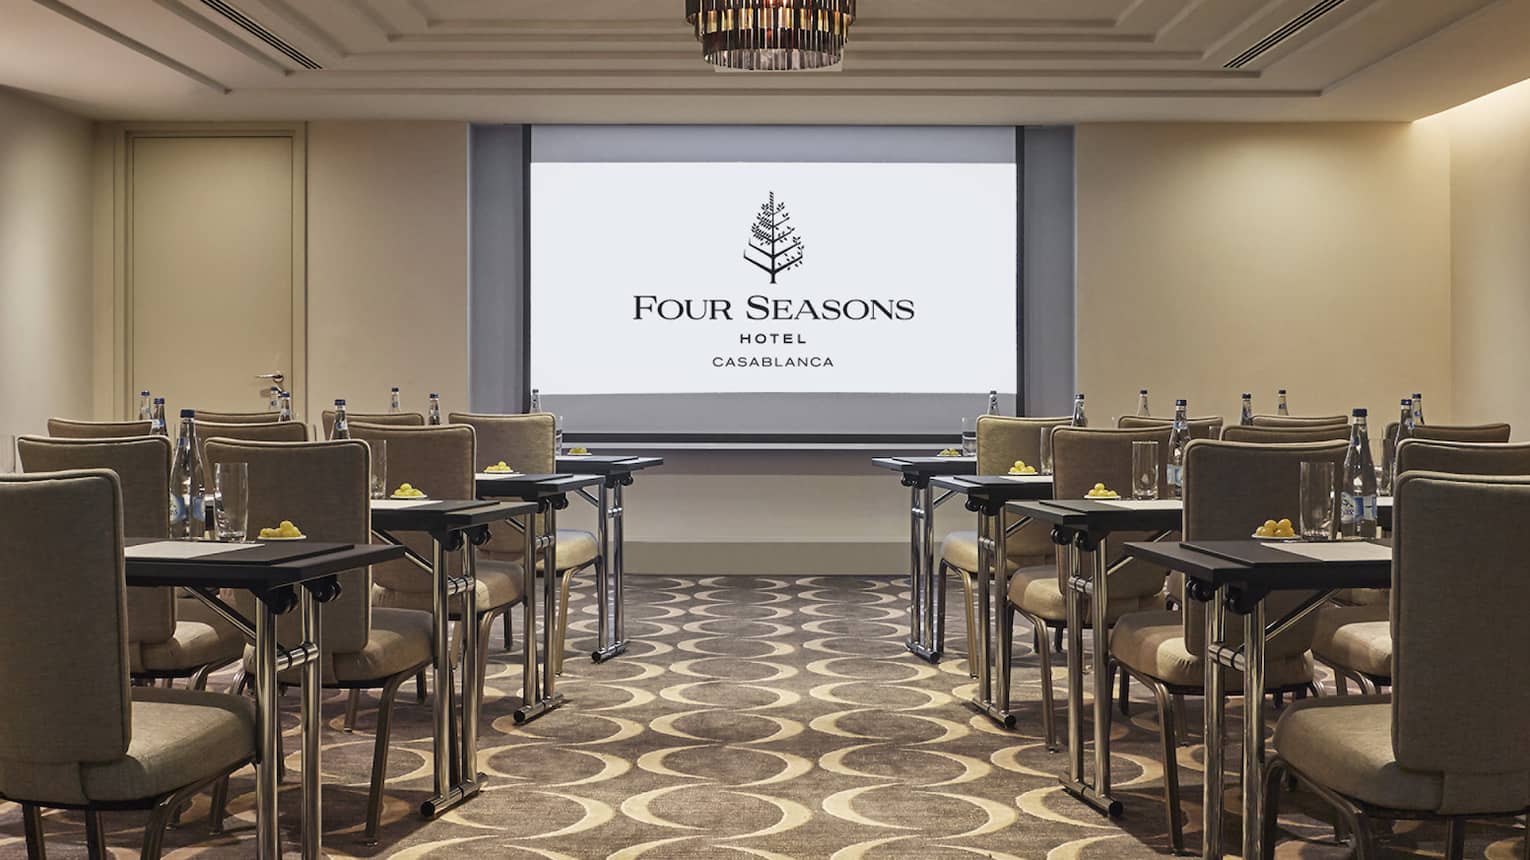 Rows of chairs, tables facing large screen with Four Seasons logo